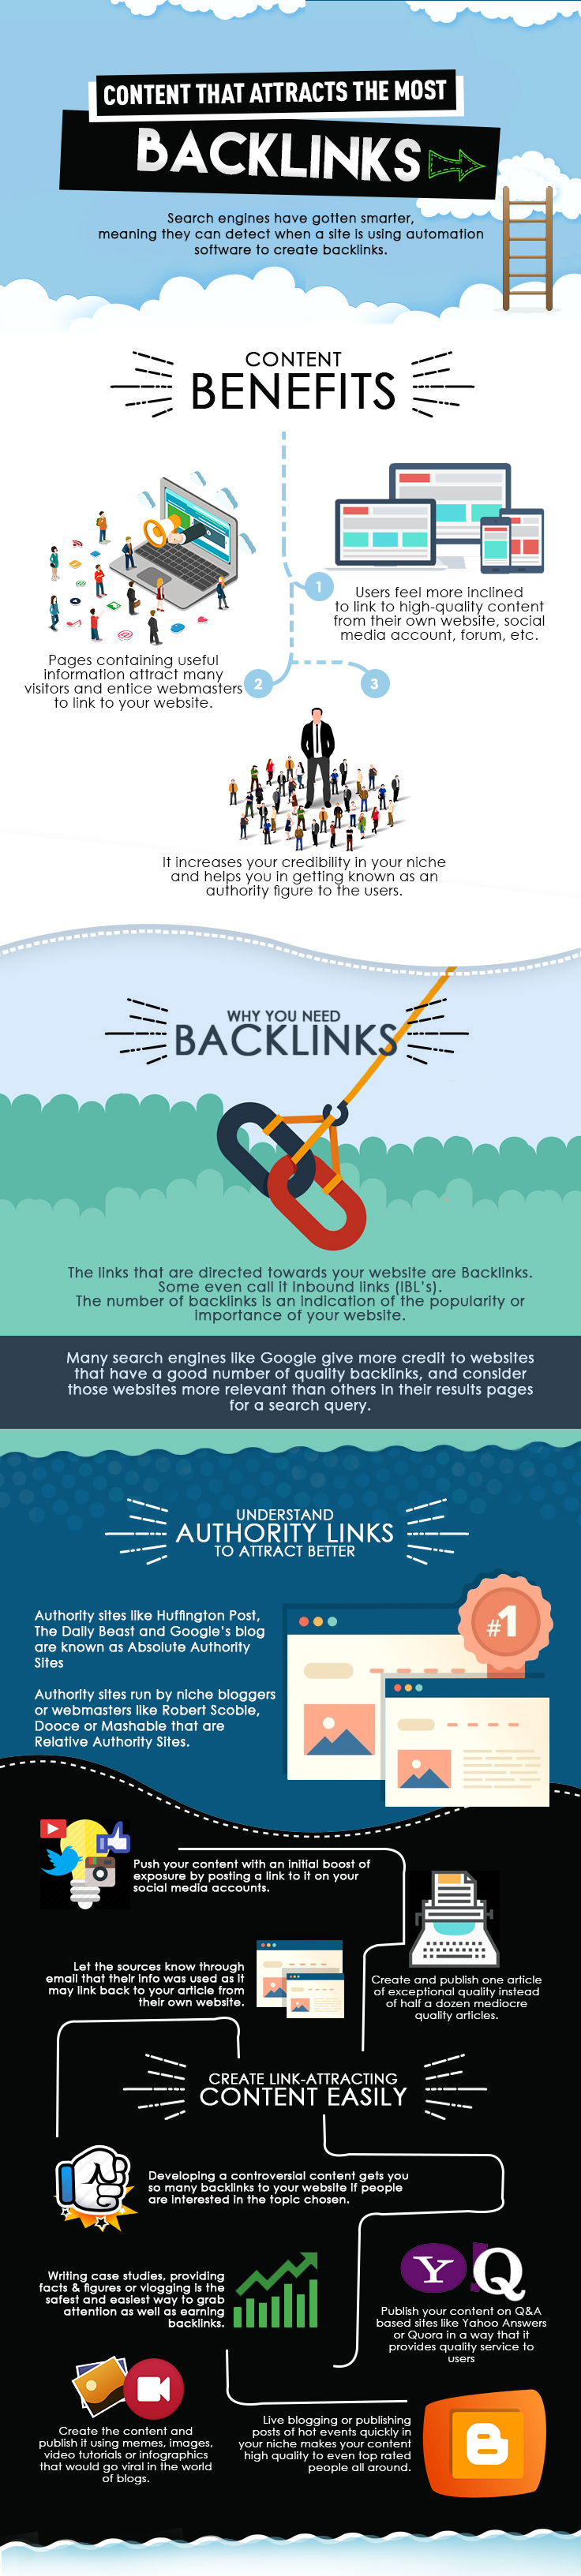 Content that attracts backlinks Infographic